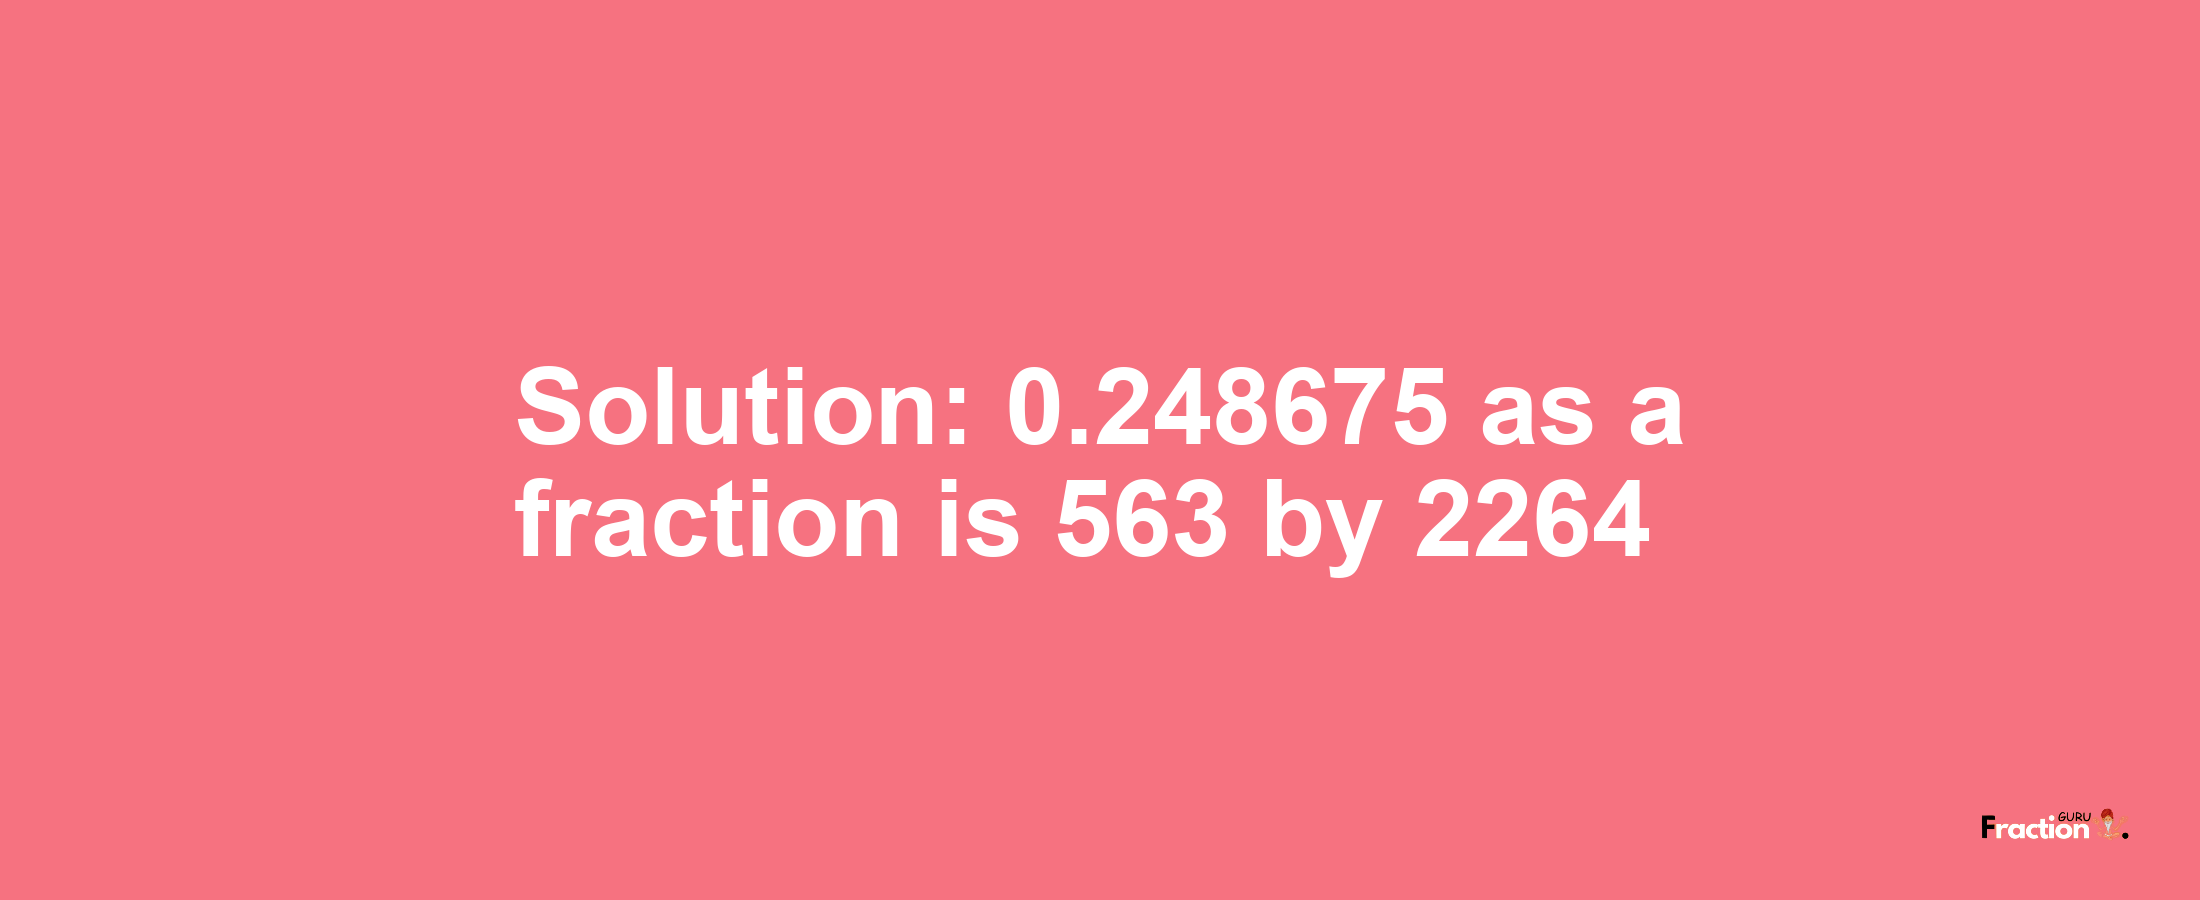 Solution:0.248675 as a fraction is 563/2264